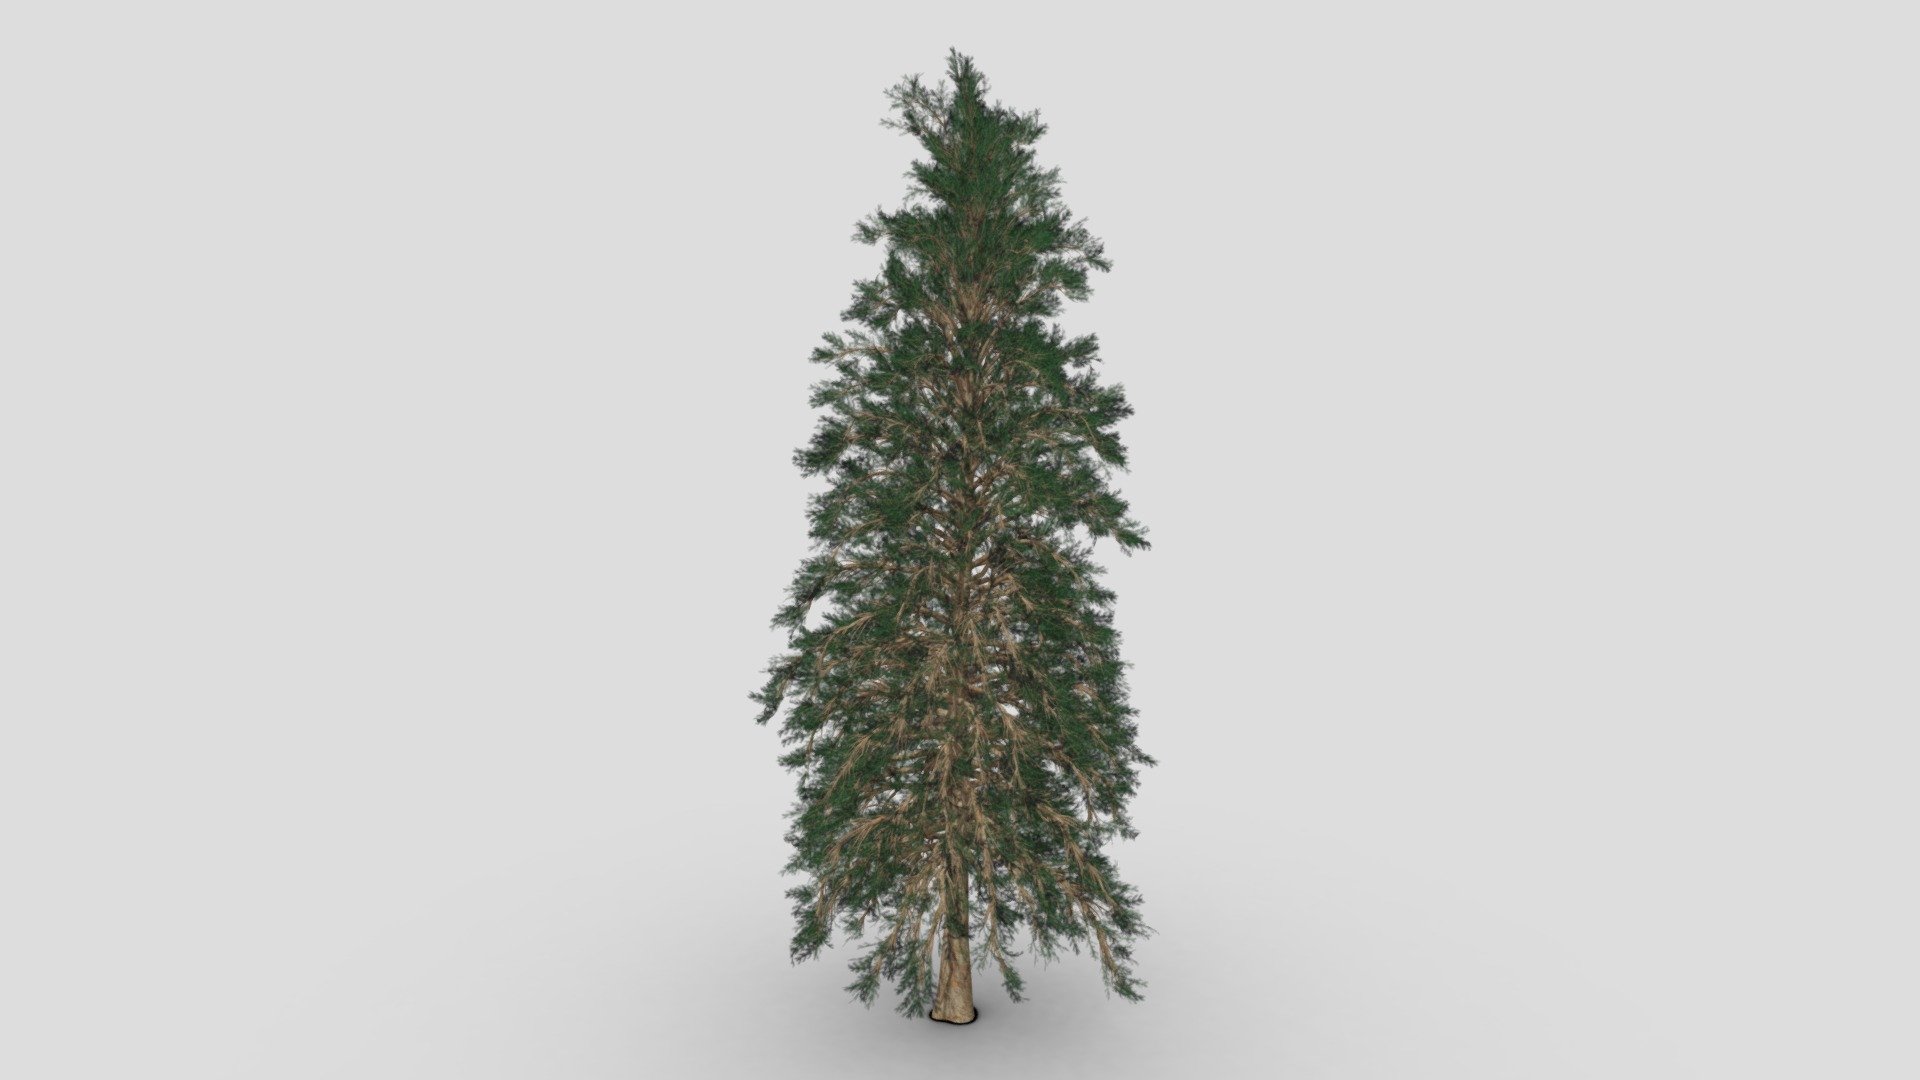 A pine is any conifer in the genus Pinus of the family Pinaceae. Pinus is the sole genus in the subfamily Pinoideae. The Plant List compiled by the Royal Botanic Gardens, Kew and Missouri Botanical Garden accepts 126 species names of pines as current, together with 35 unresolved species and many more synonyms 3d model